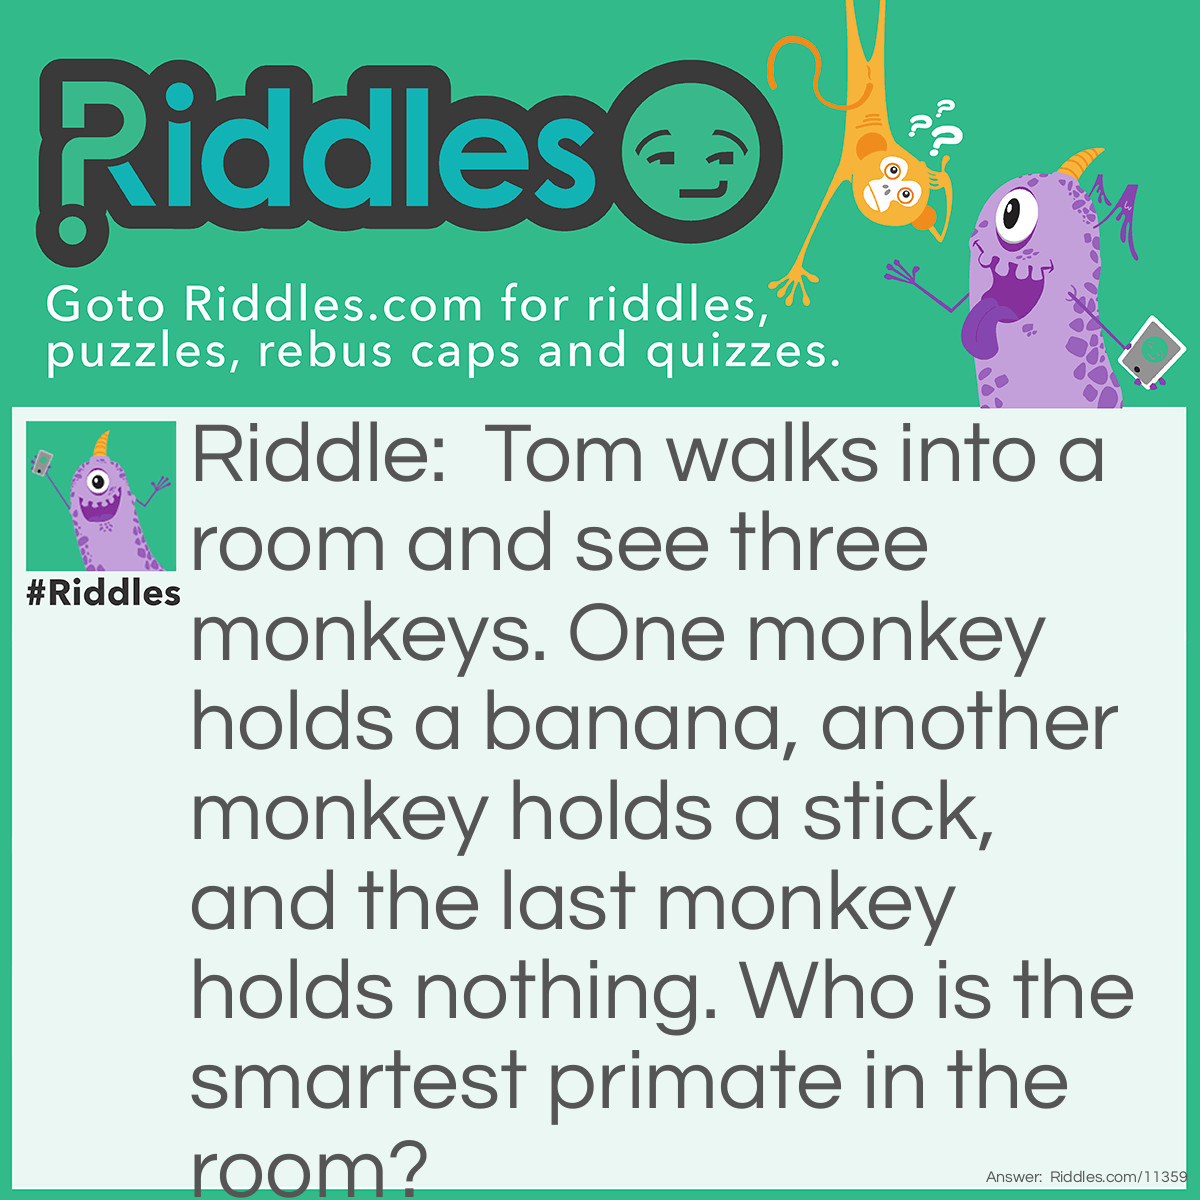 Riddle: Tom walks into a room and see three monkeys. One monkey holds a banana, another monkey holds a stick, and the last monkey holds nothing. Who is the smartest primate in the room? Answer: Assuming that Tom is a human, then he is the smartest primate in the room because humans are also primates.